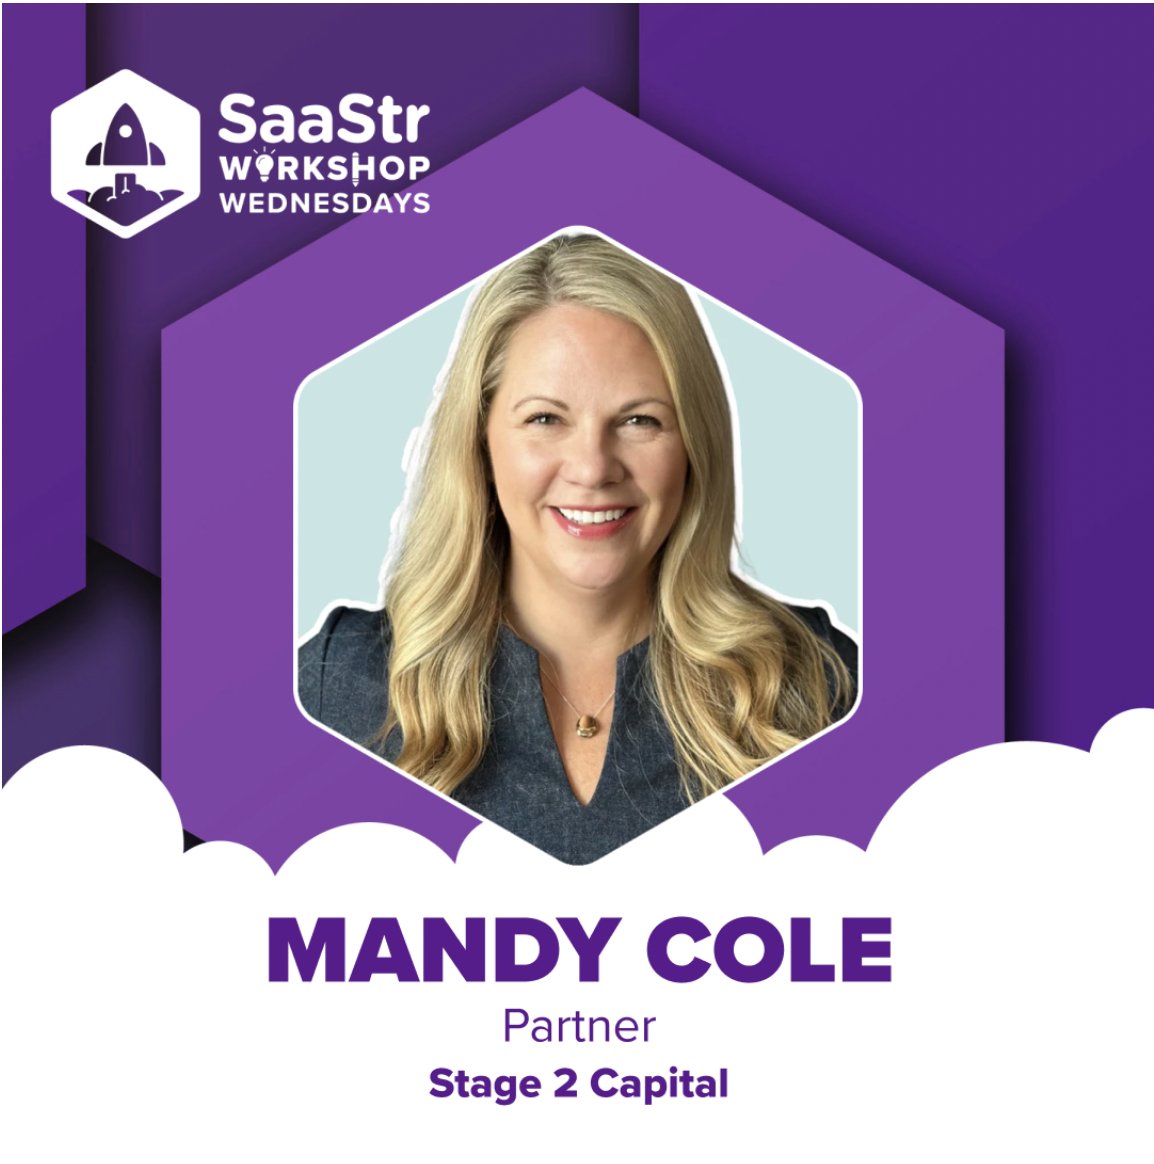 This Wednesday, we’re sharing the 5 Steps to Build Your First GTM Playbook with Stage 2 Capital. Join us as speaker @MandyHCole, Partner at @Stage2Capital, shares the 5 steps all SaaS companies should know as you go-to-market. This session is part of SaaStr’s ongoing Workshop…